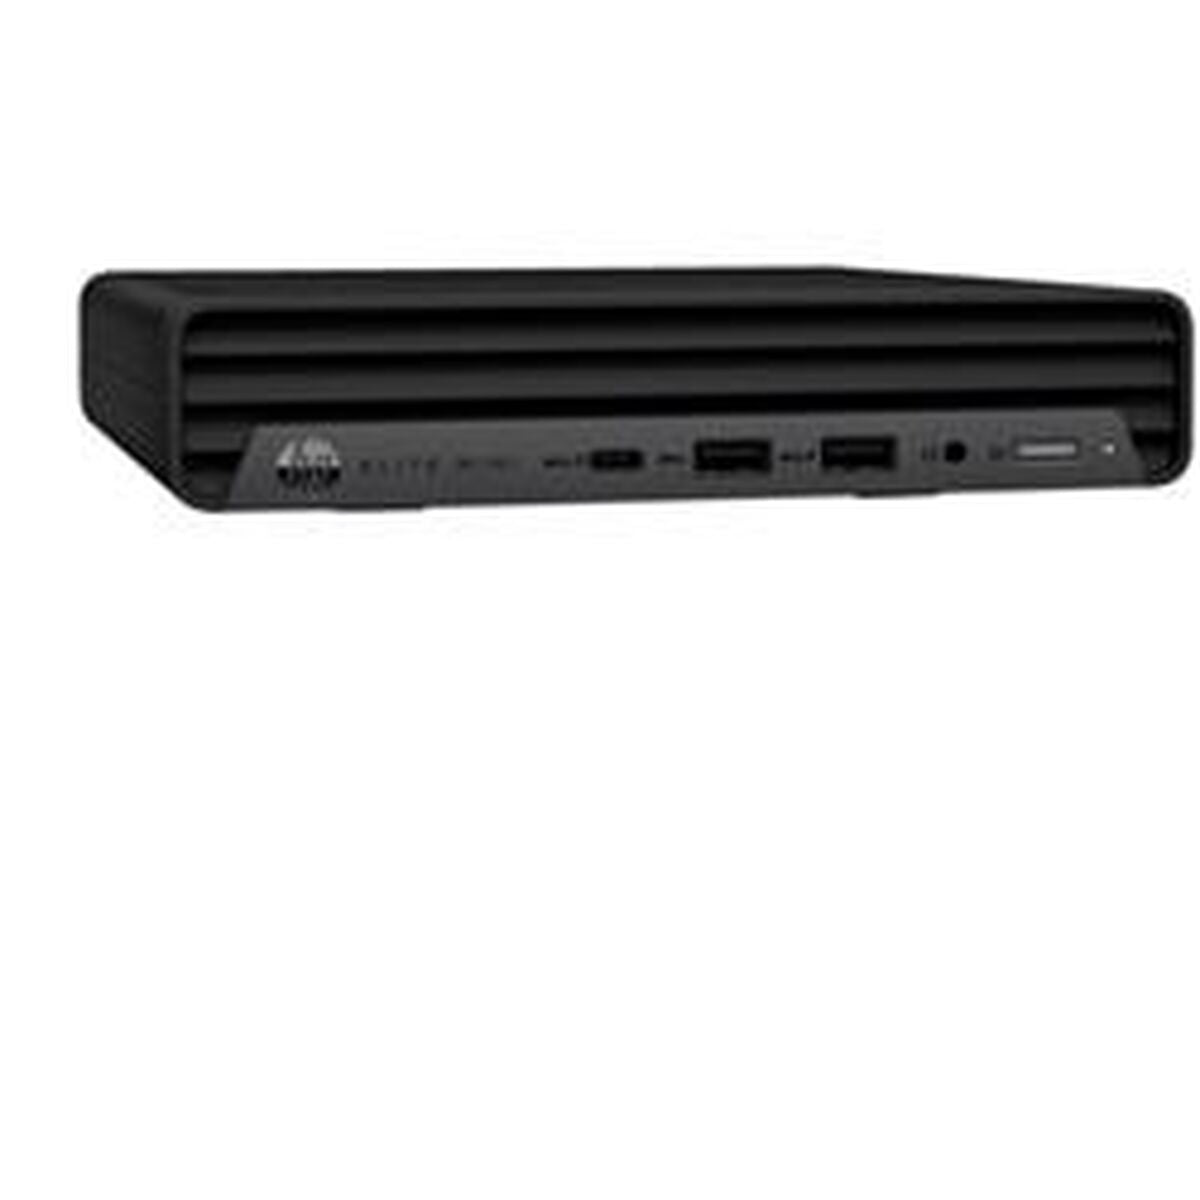 Desktop PC HP 623S3ET#ABE I5-13500T 16 GB RAM 512 GB SSD Black, HP, Computing, Desktops, desktop-pc-hp-623s3et-abe-i5-13500t-16-gb-ram-512-gb-ssd-black, Brand_HP, category-reference-2609, category-reference-2791, category-reference-2792, category-reference-t-19685, category-reference-t-19903, category-reference-t-21381, computers / components, Condition_NEW, office, Price_900 - 1000, Teleworking, RiotNook